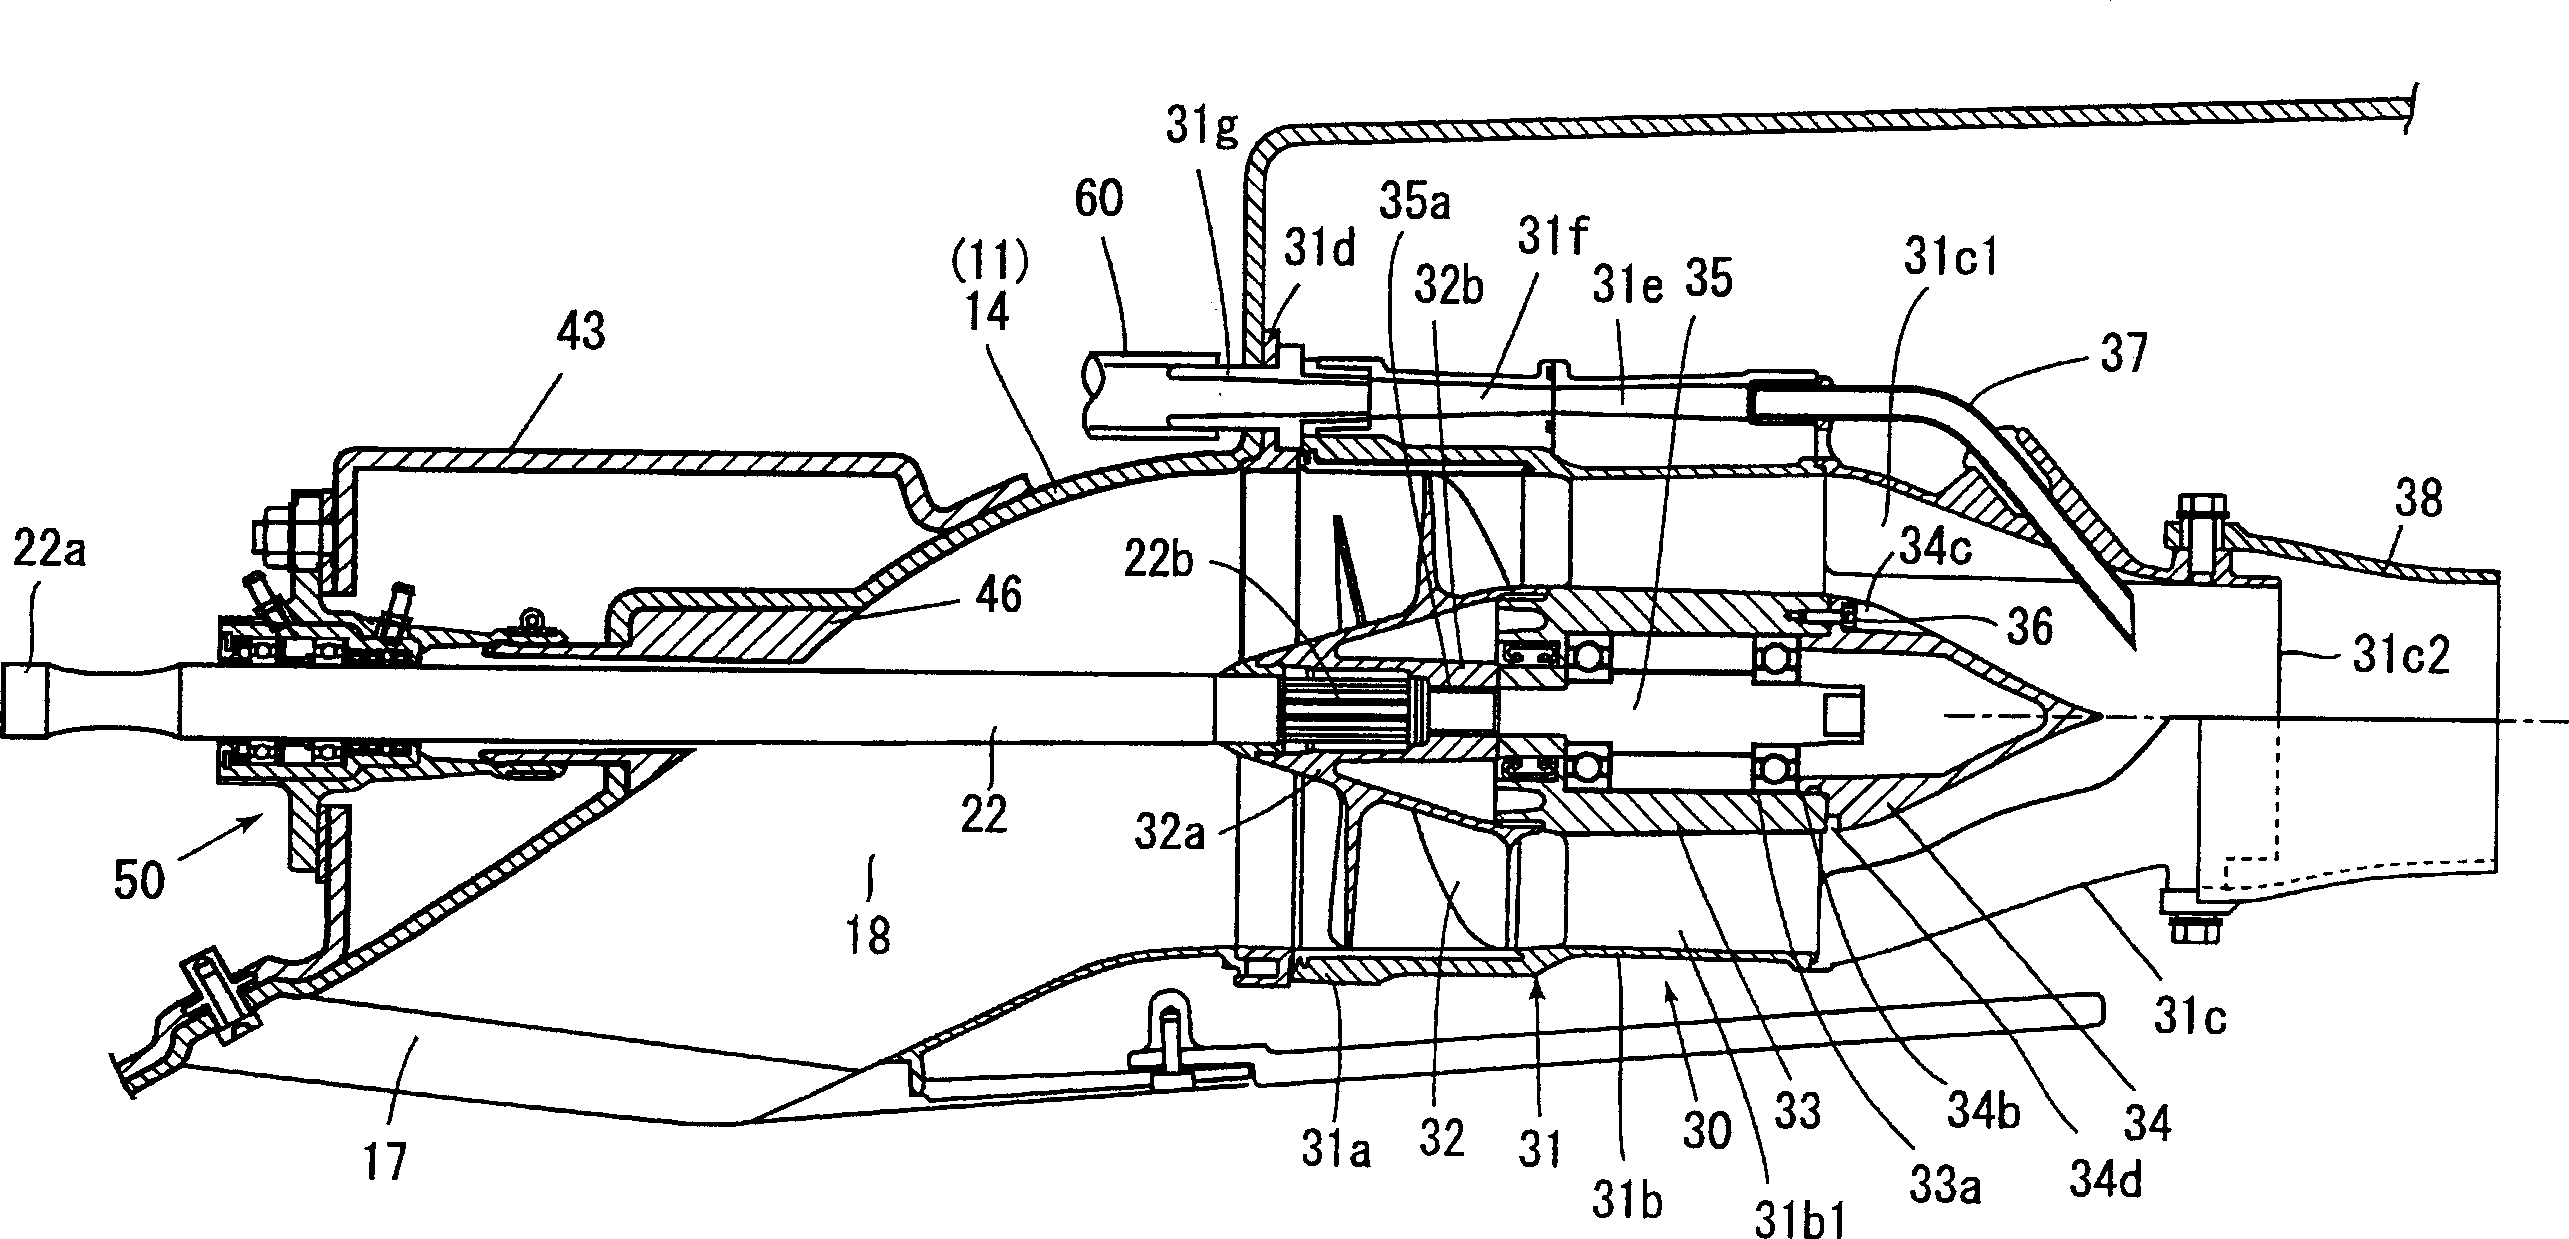 Bearing structure of drive shaft for ship